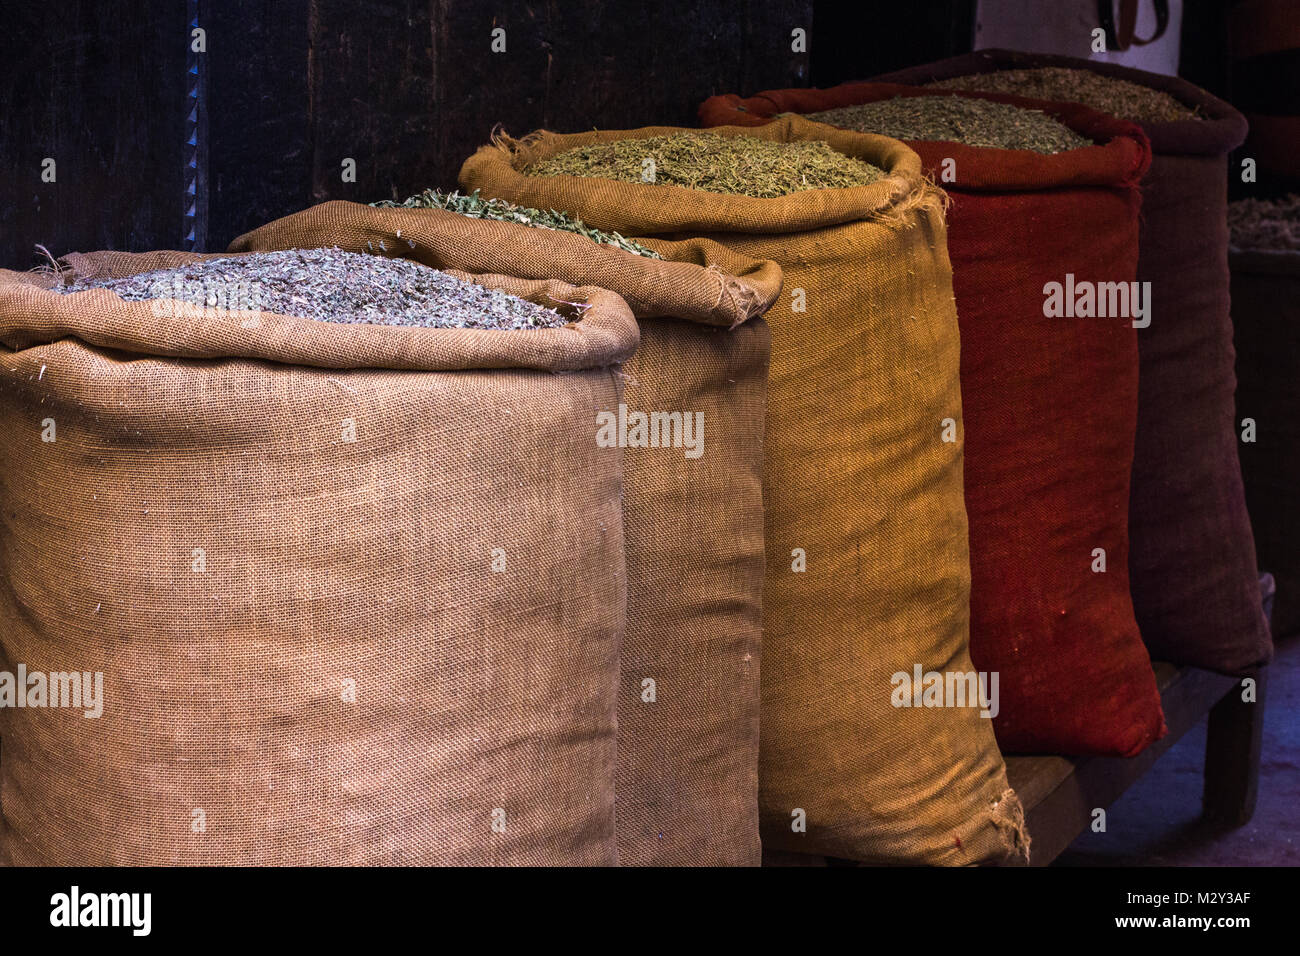 Row of hessian sacks of herbs and spices for sale in the markets souks of Marrakesh, Morocco. Stock Photo